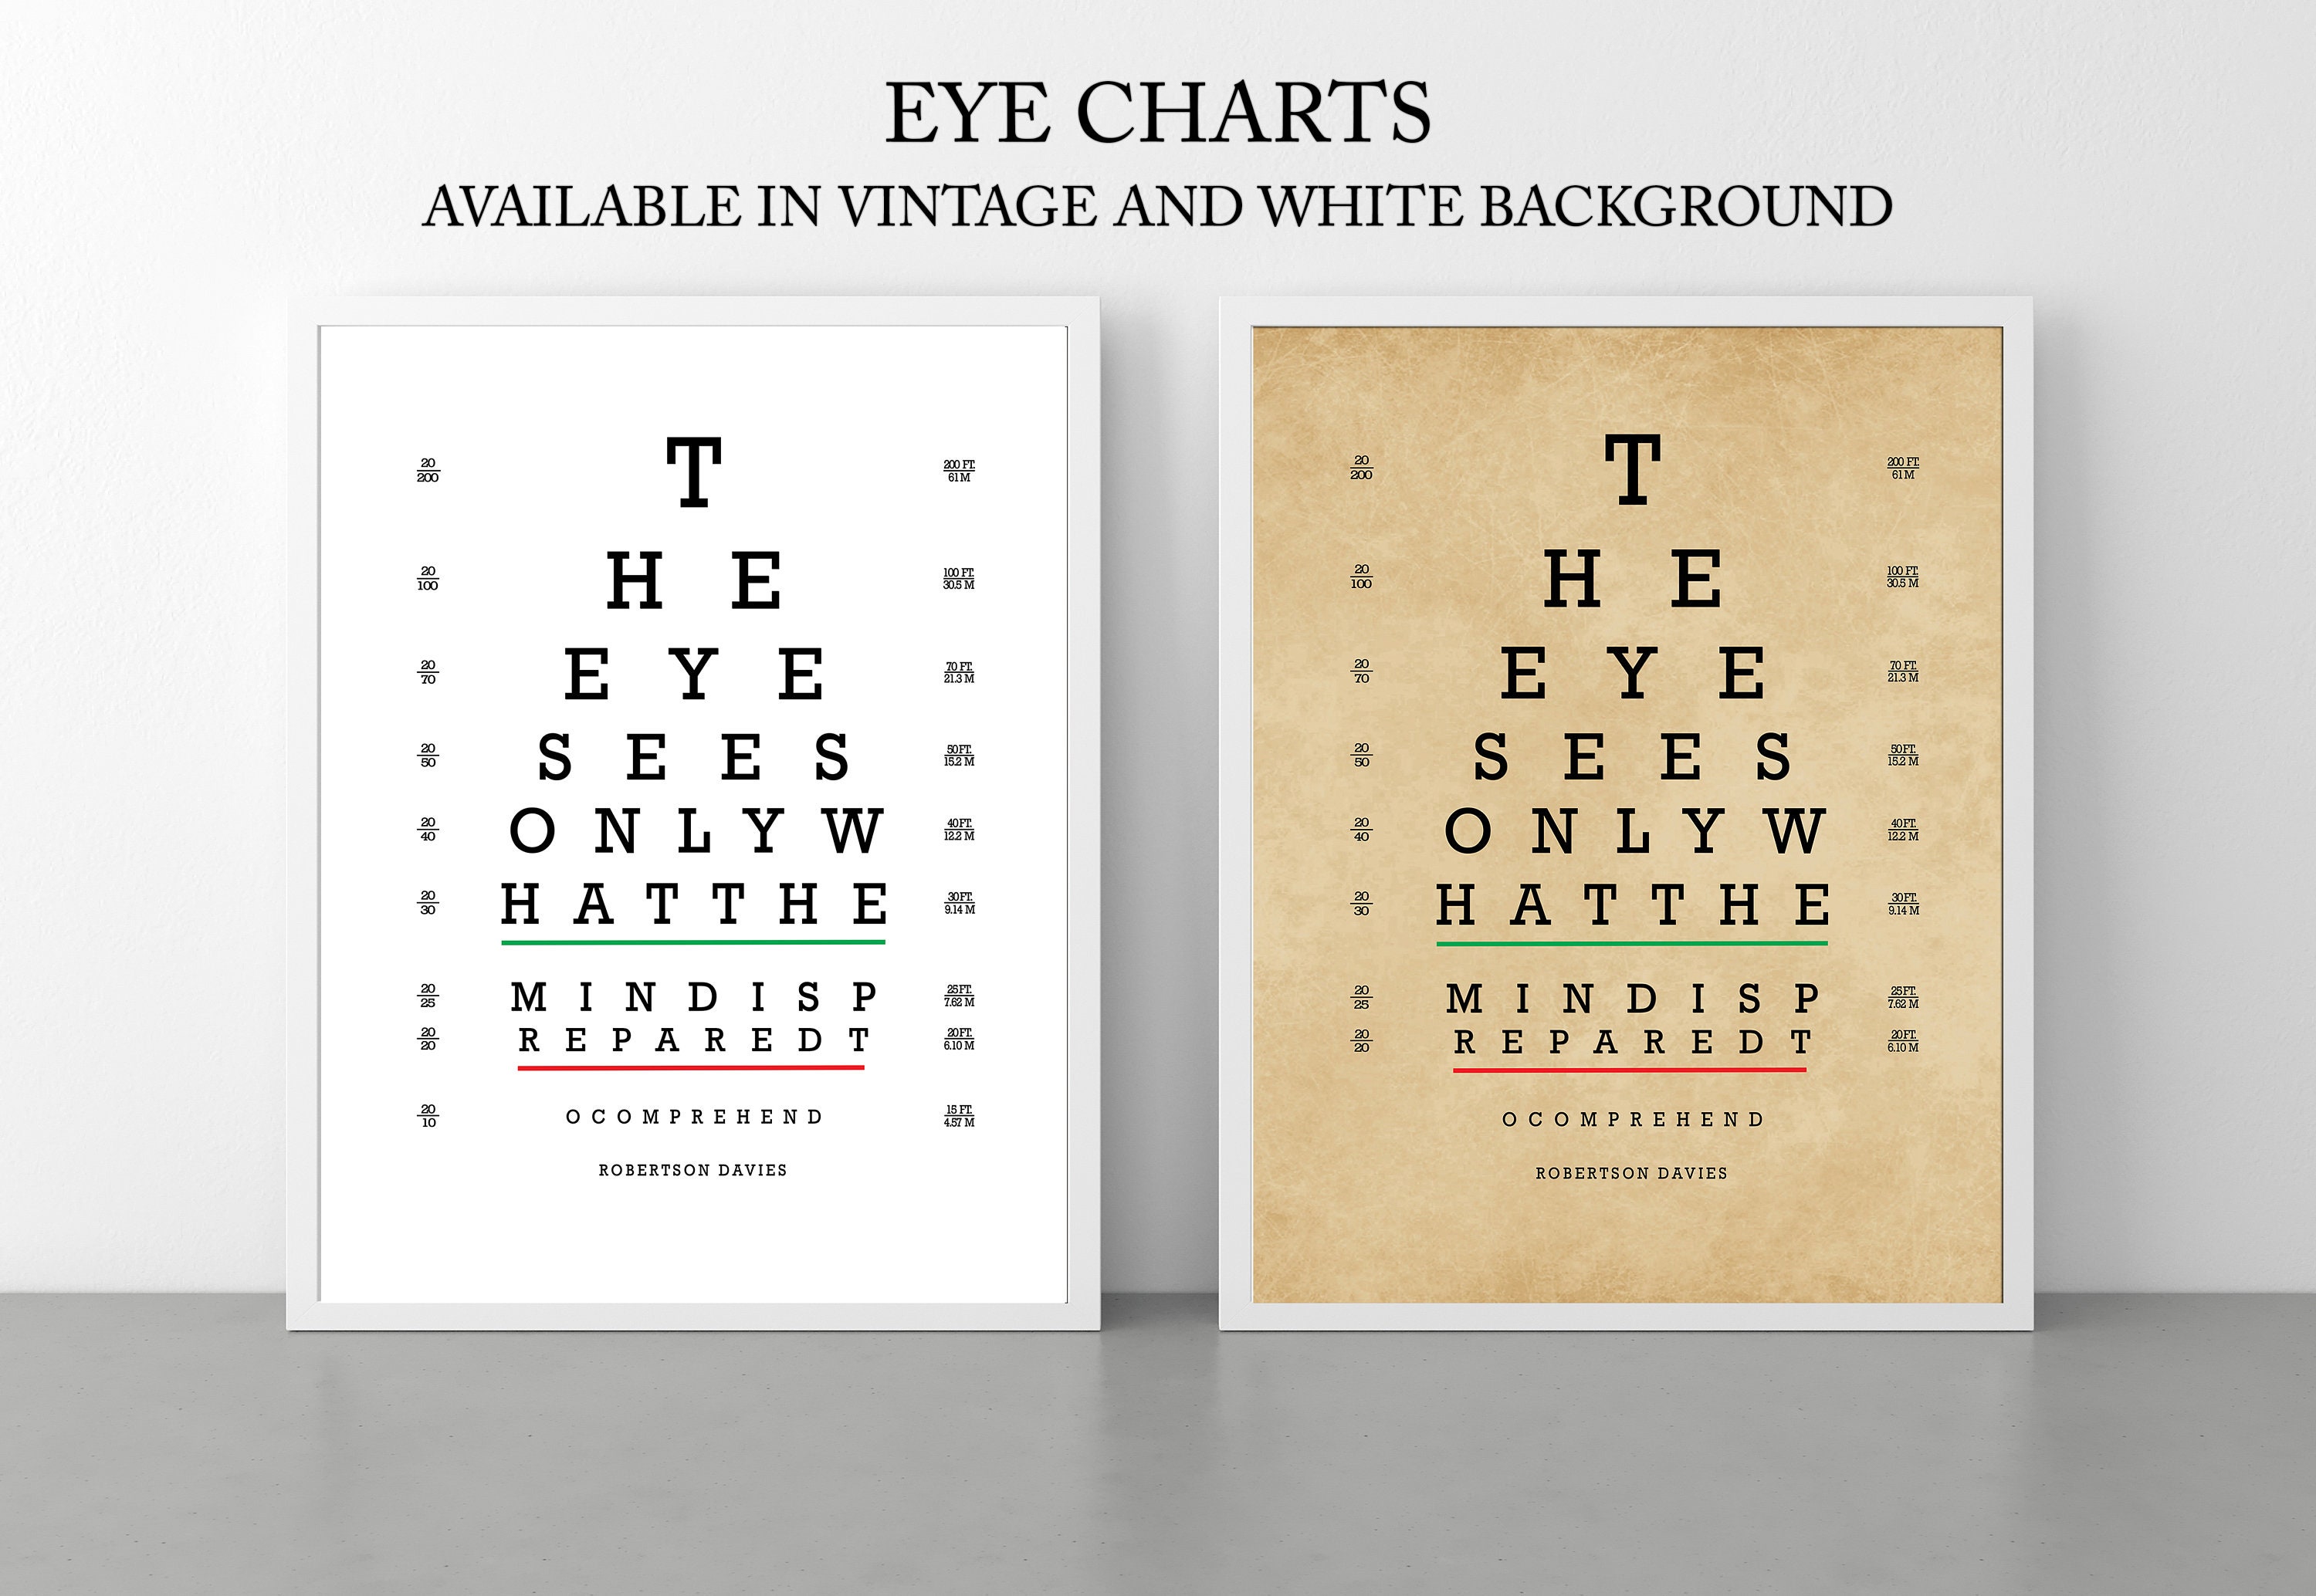 Here is the doc's favrorite quote, done in eye chart style